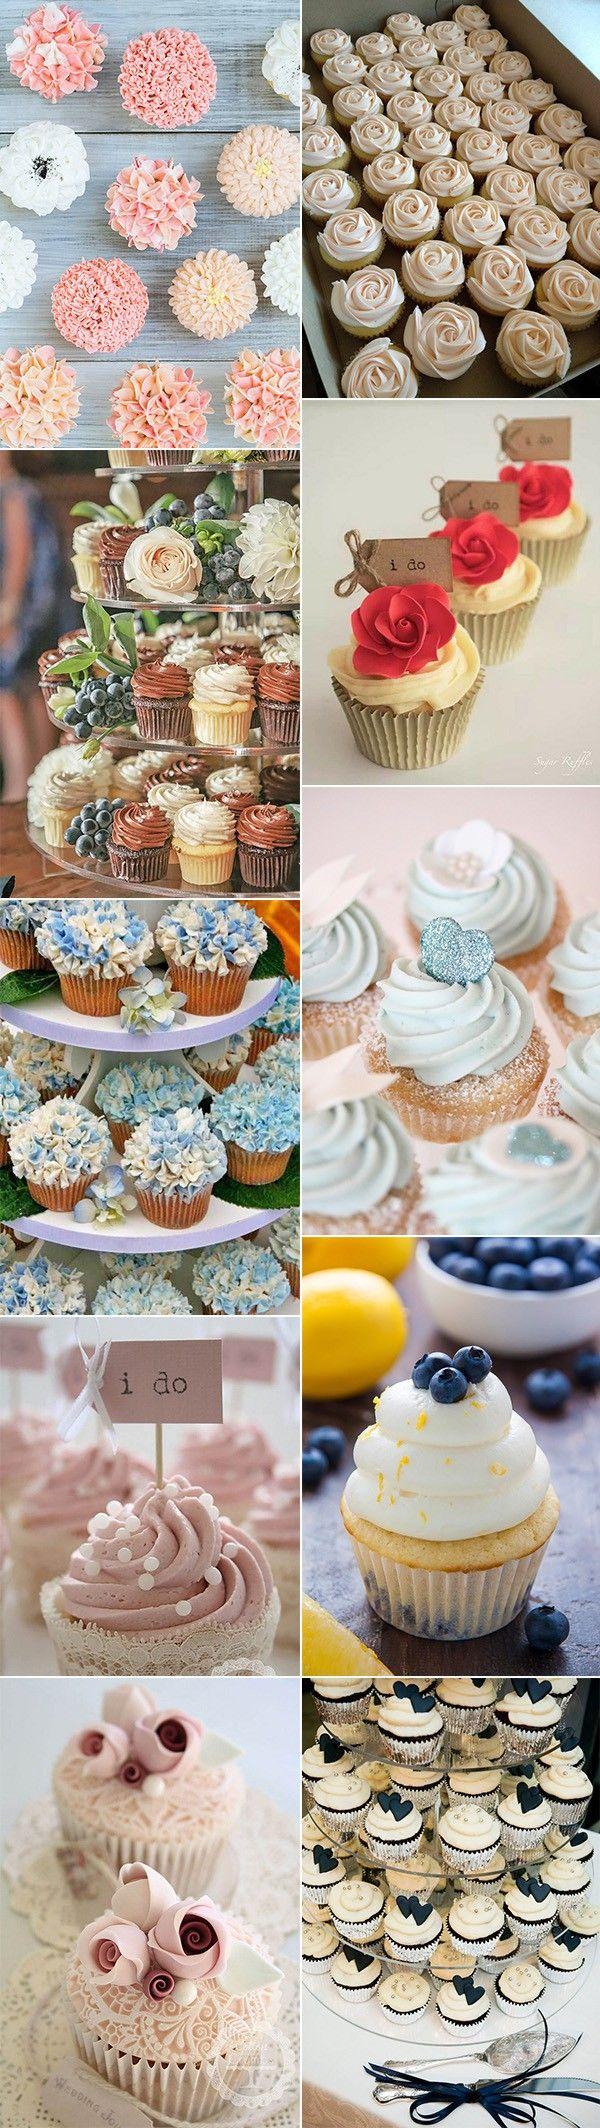 Hochzeit - 24 Creative Wedding Cupcake Ideas For Your Big Day - Page 3 Of 3